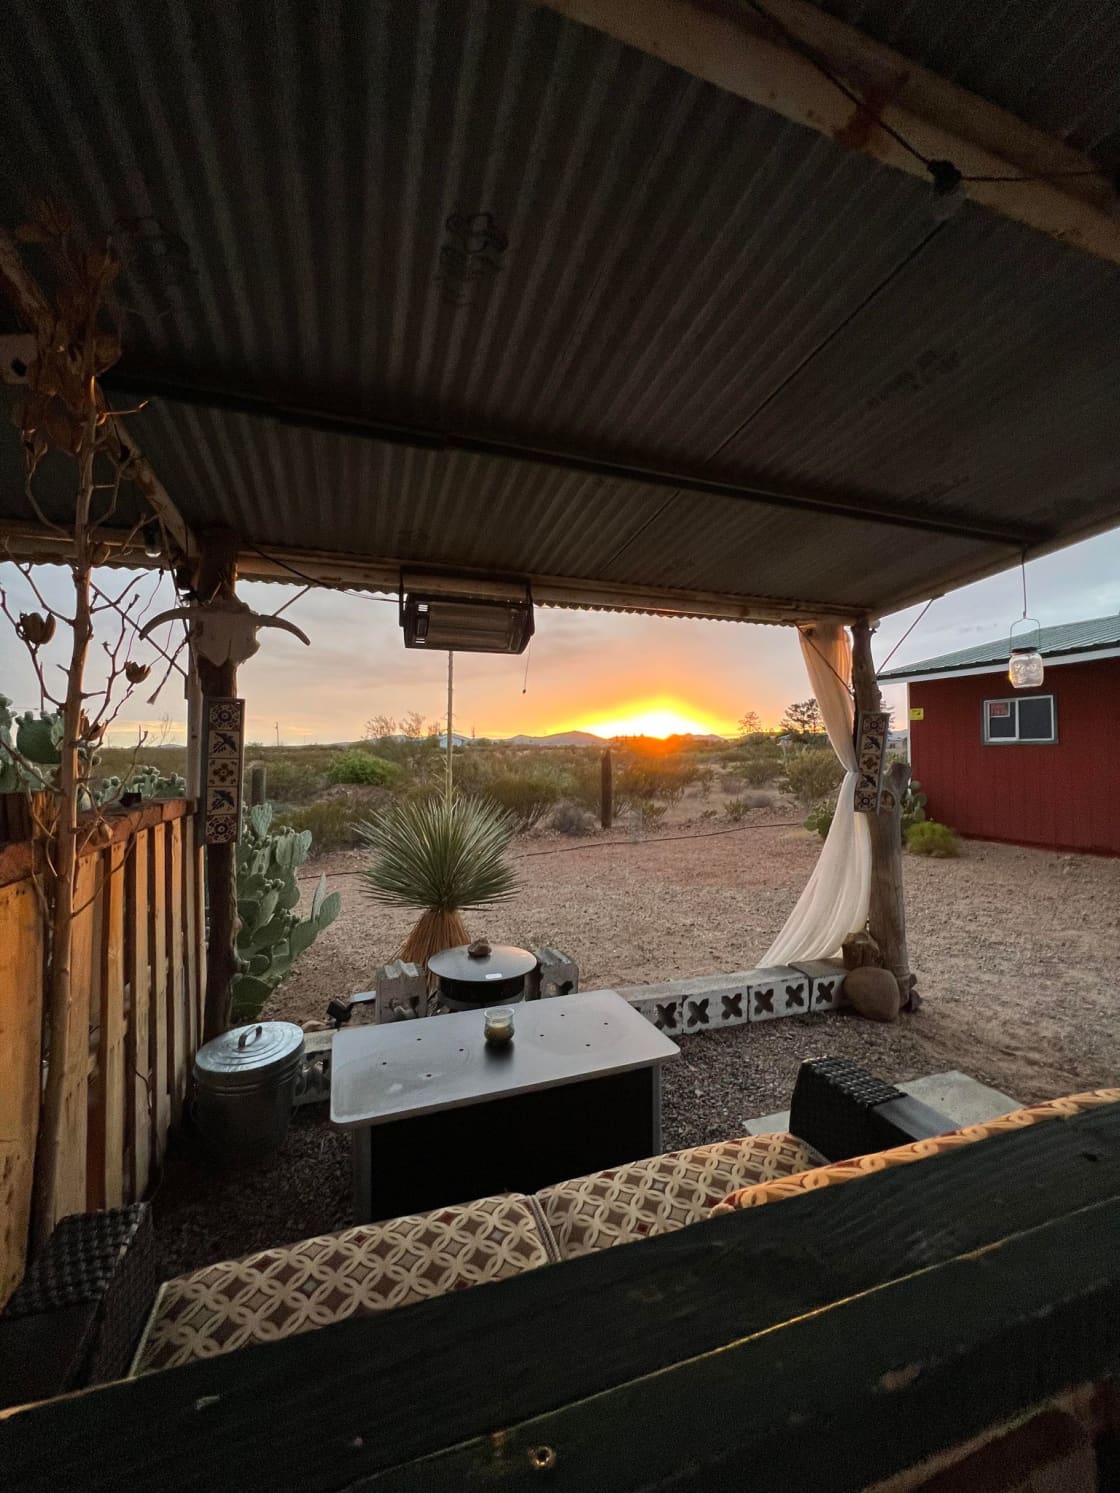 Your private sunset room with a view. It changes EVERY NIGHT! Oh, did I mention the firepit?
